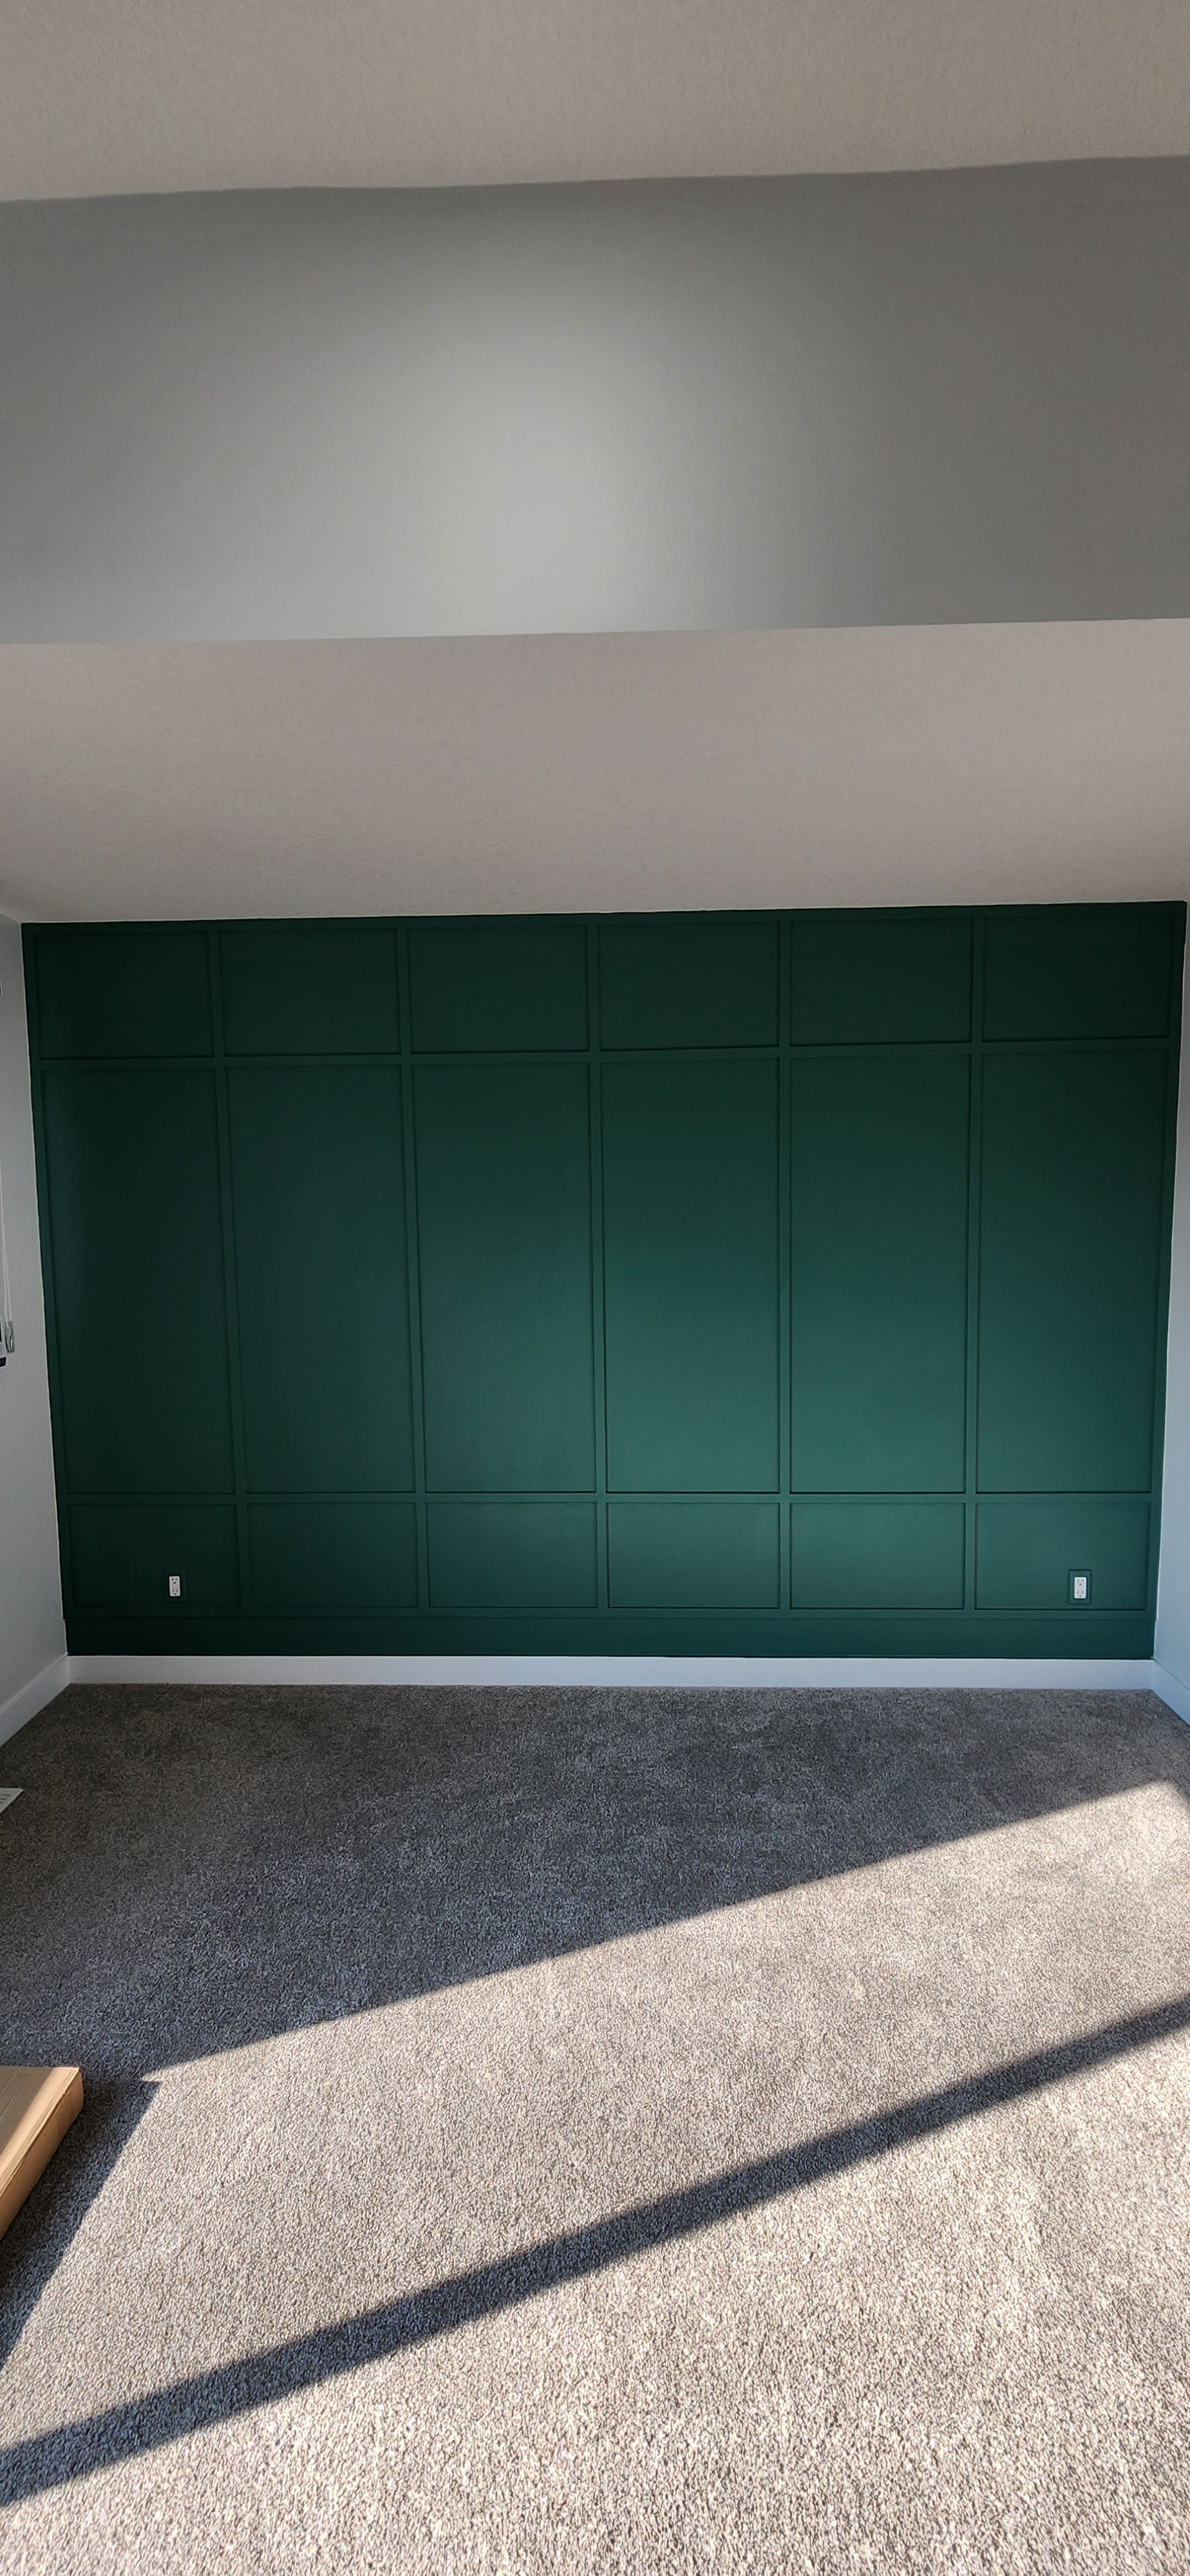 Green board and batten wall in an empty room with white walls and grey carpet